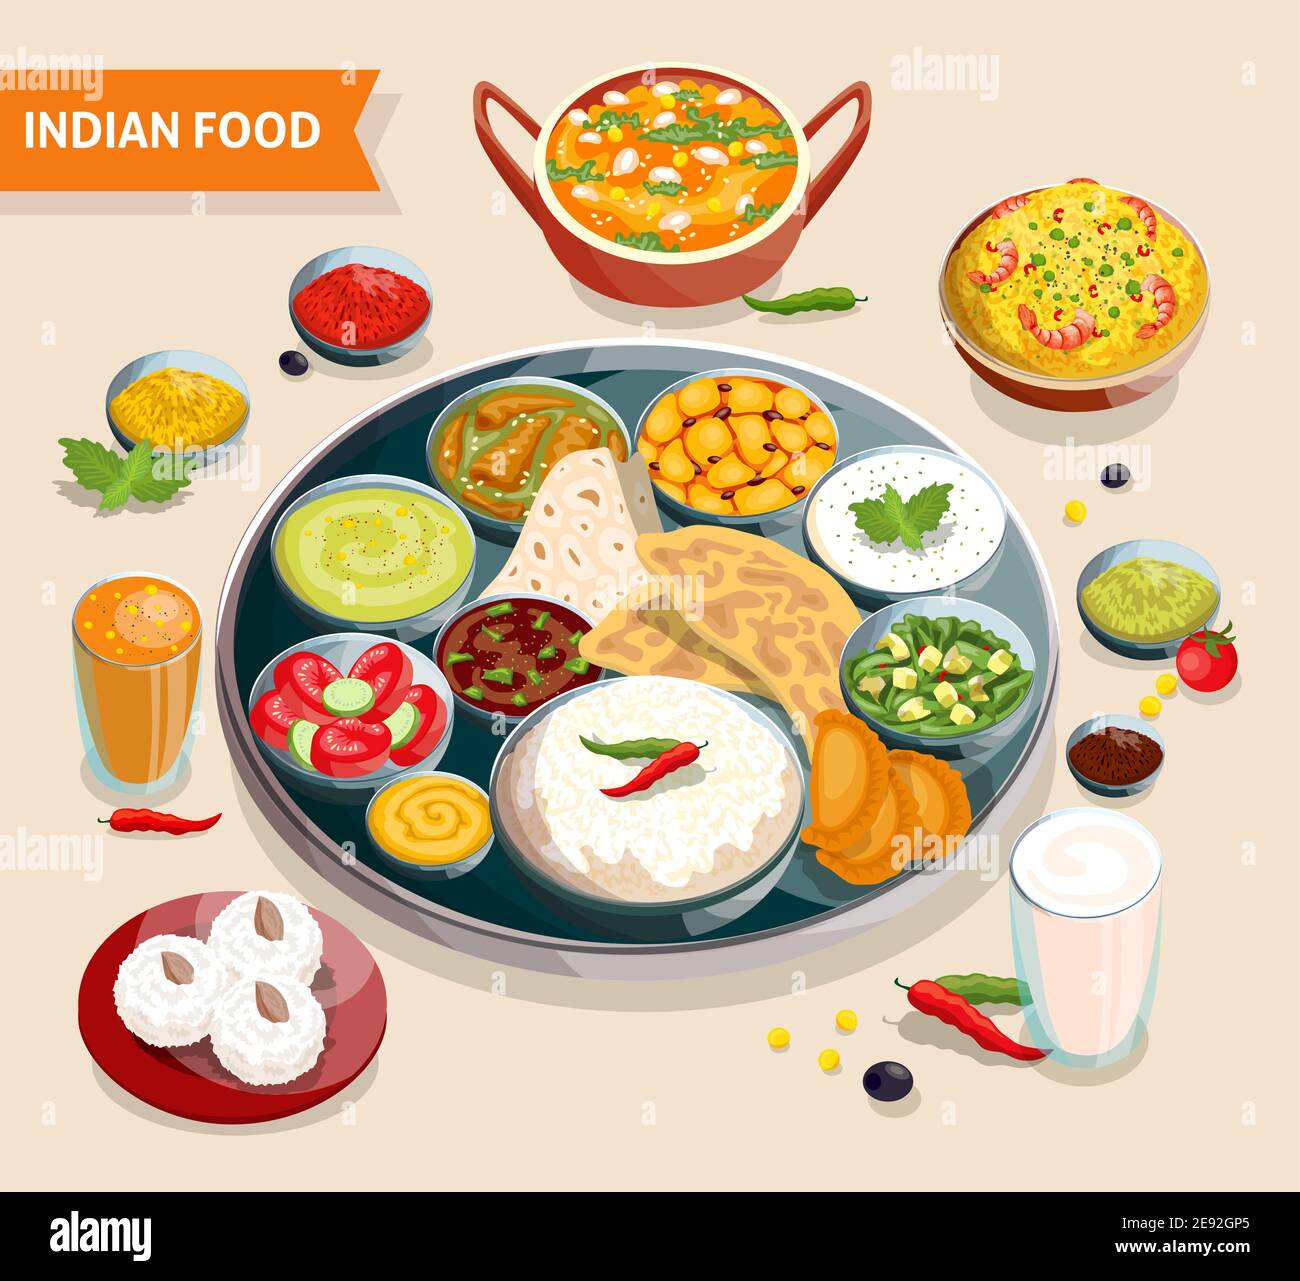 Indian food composition of dishes with seafood beans verdure and sauces also beverages and sweets vector illustration Stock Vector